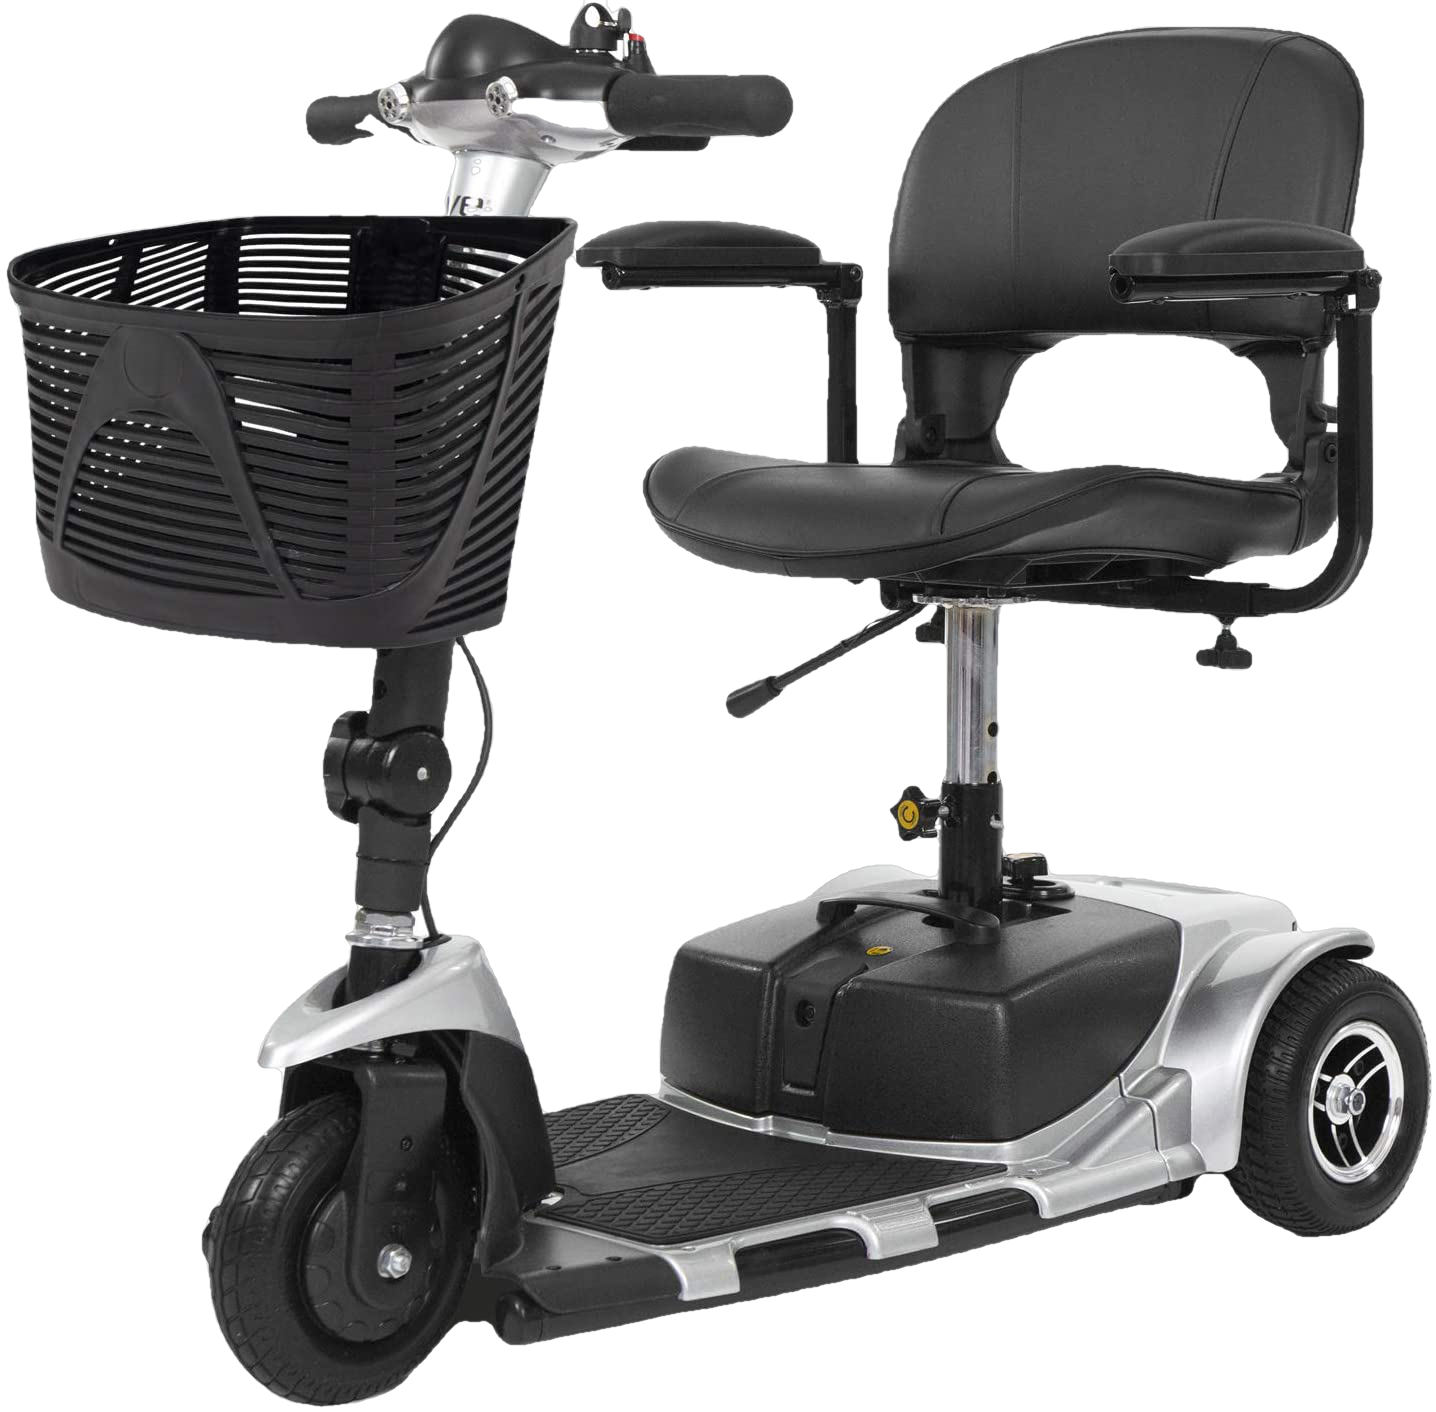 Vive Health, Vive Health MOB1025 3-Wheel Mobility Scooter Silver New